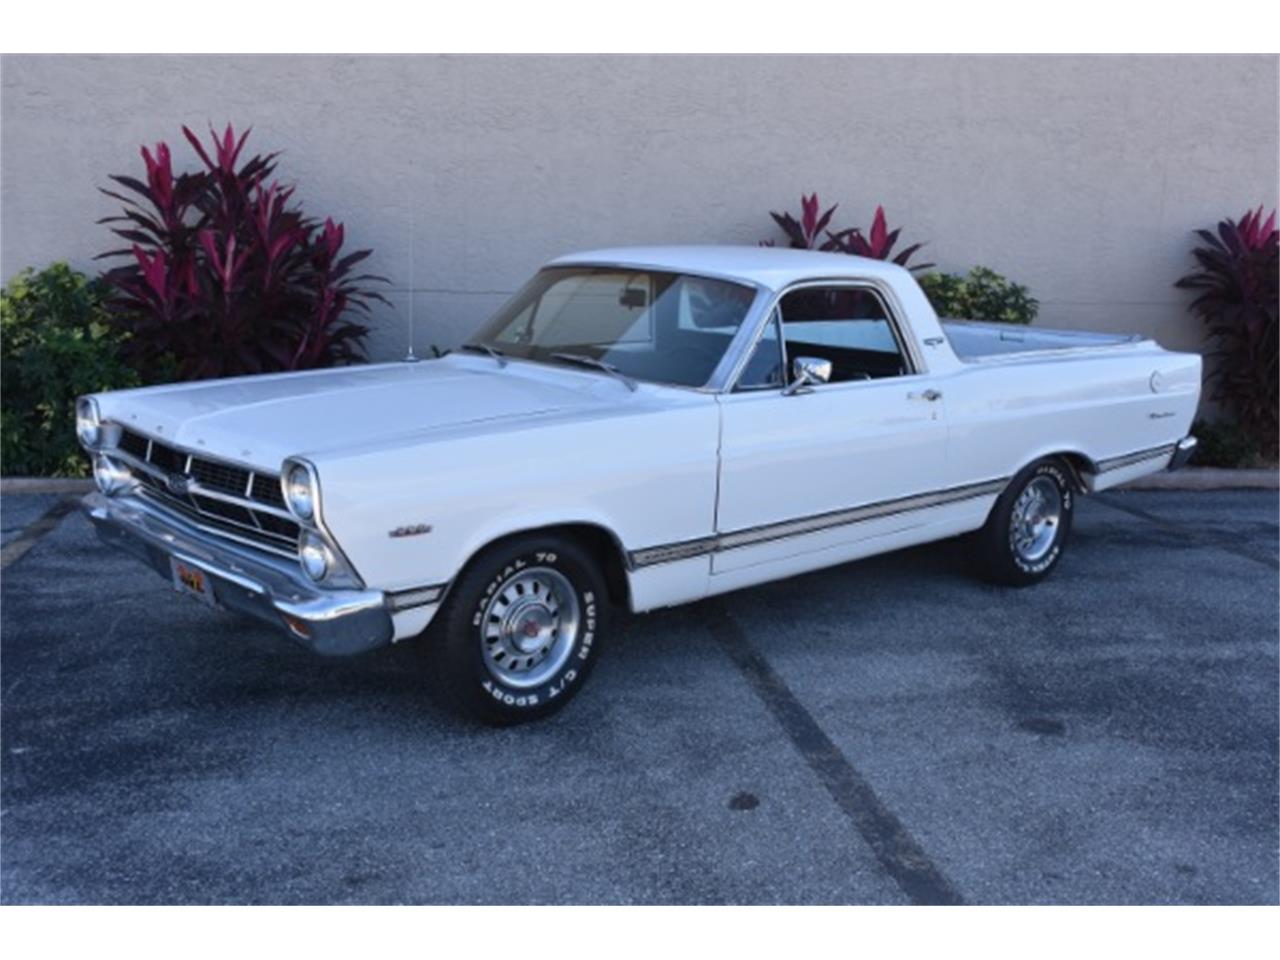 1967 ford ranchero for sale classiccars com cc 919525 1967 ford ranchero for sale